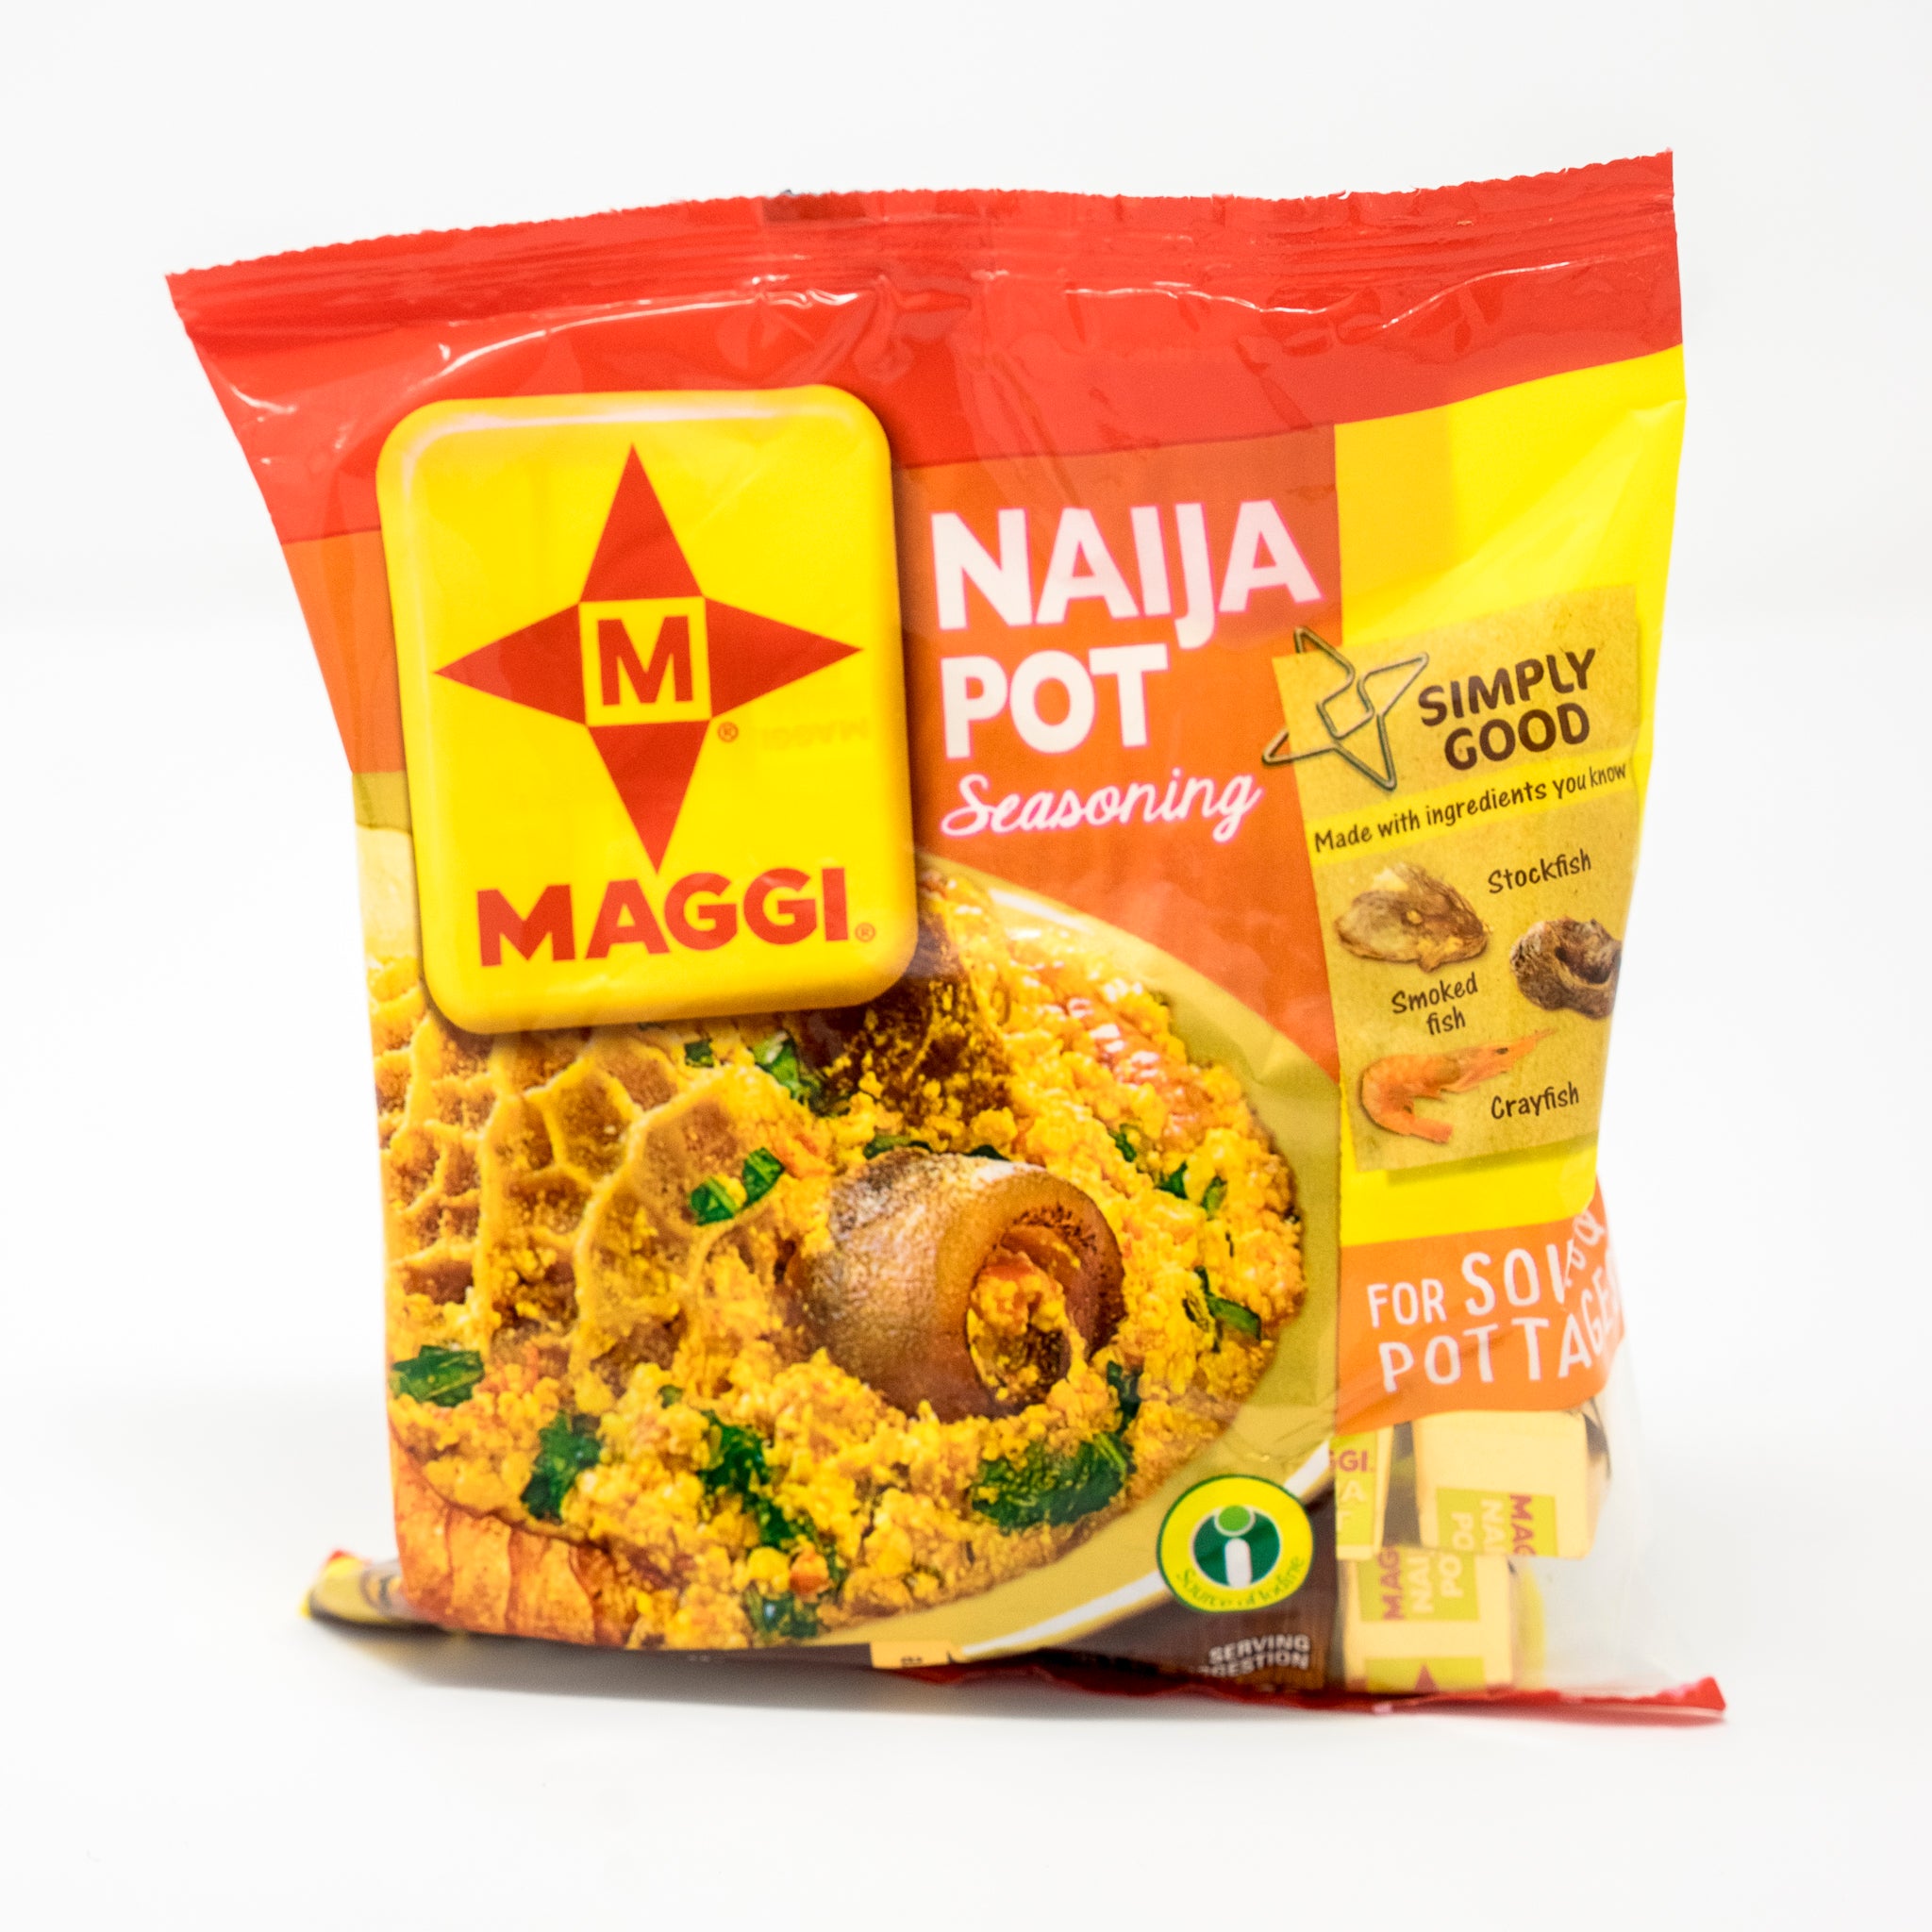 maggi products in canada